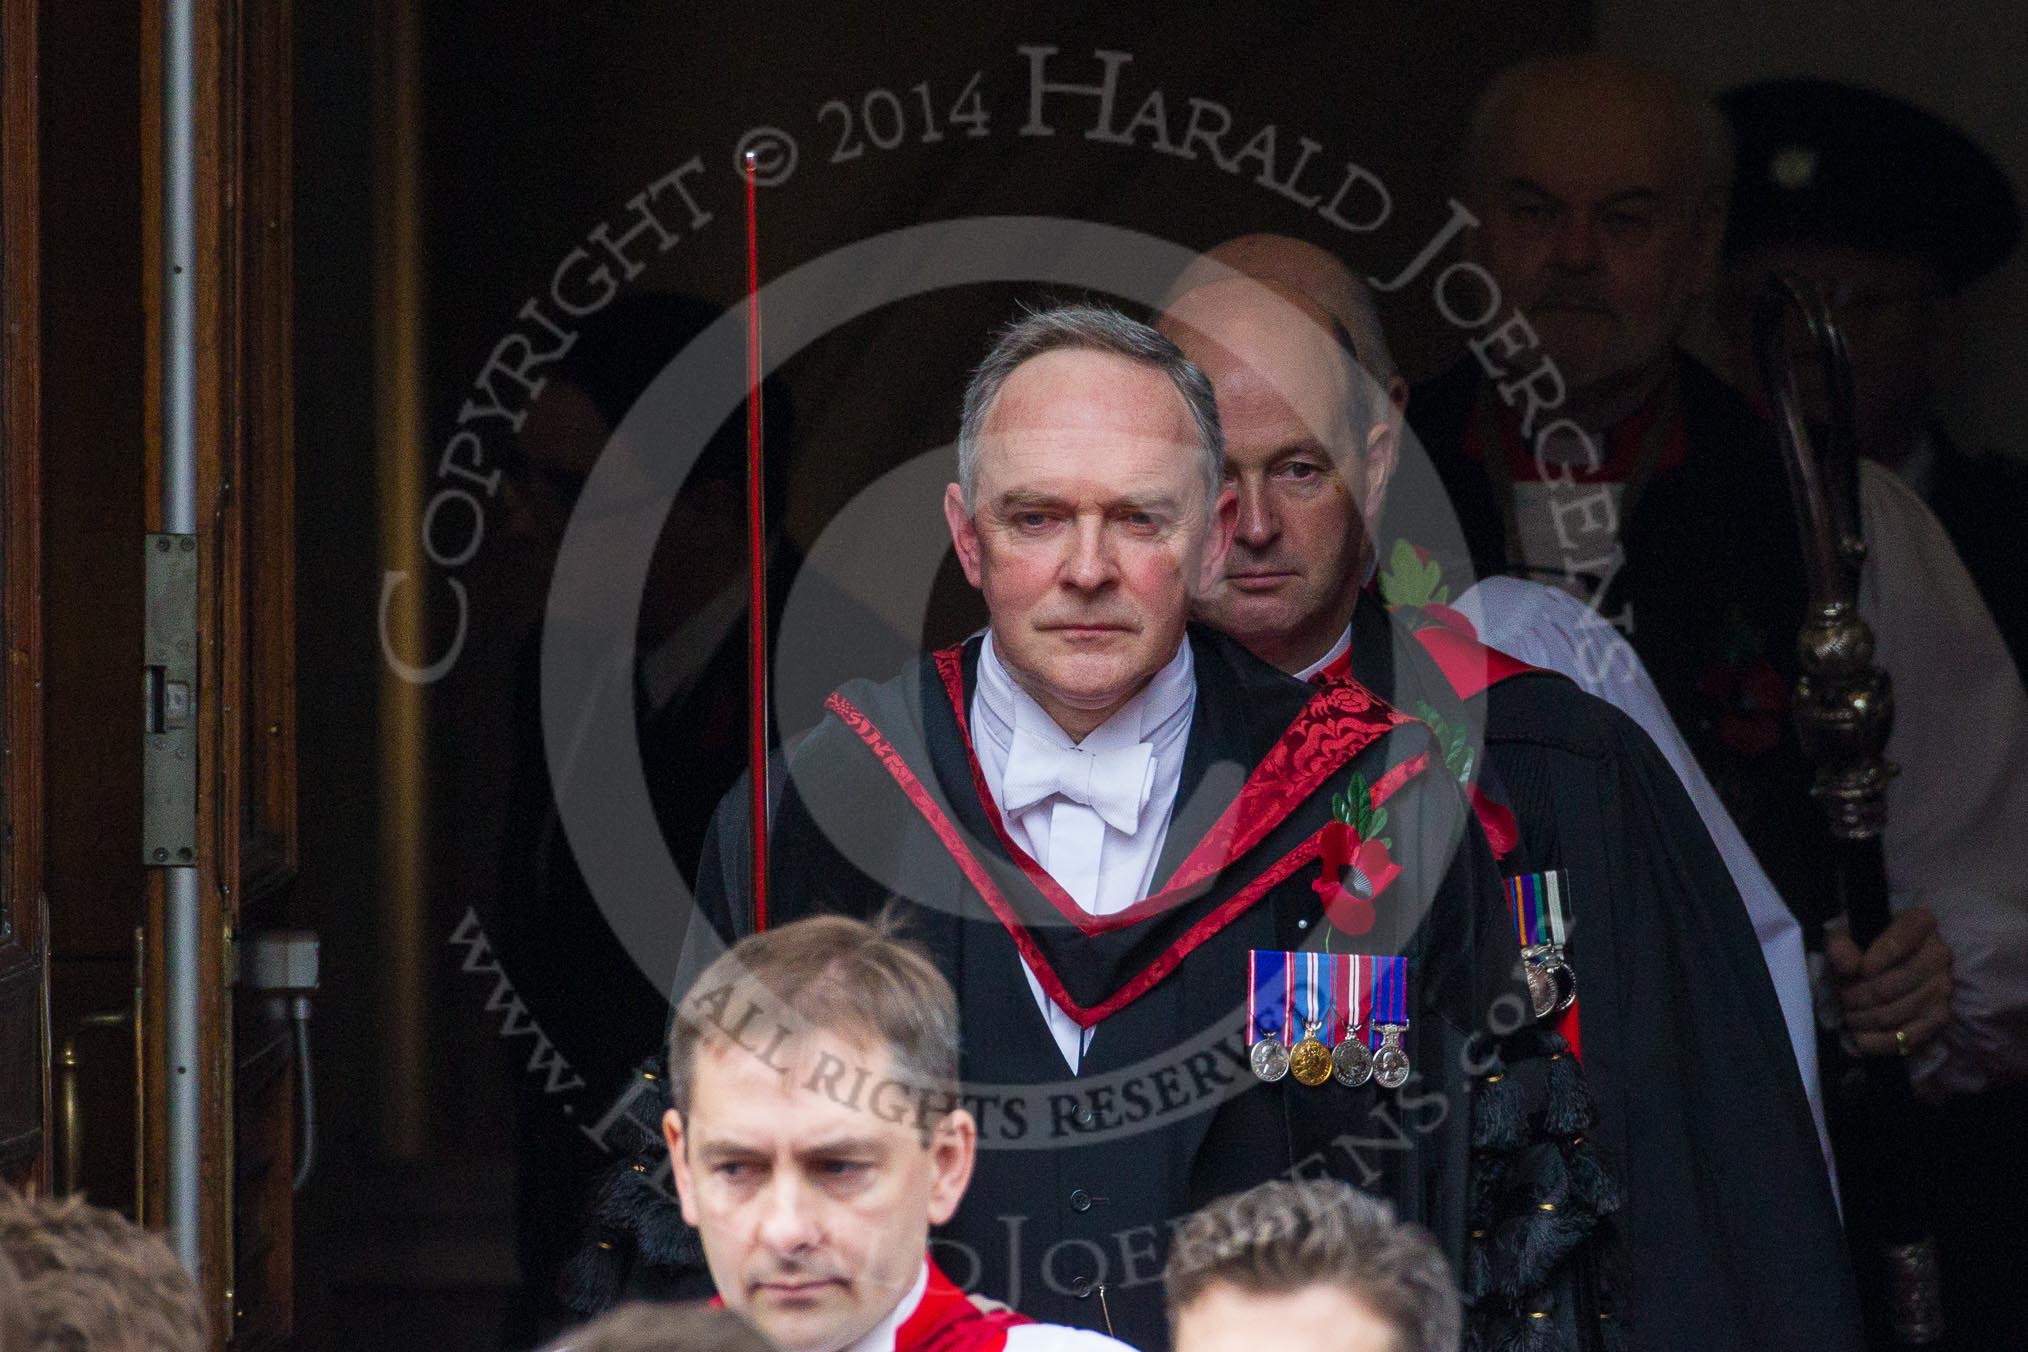 Remembrance Sunday at the Cenotaph in London 2014: The Serjeant of the Vestry, David Baldin, leaving the Foreign- and Commonwealth Office, followed by the Chaplain General to Her Majesty’s Land Forces, the Sub-Dean of Her Majesty’s Chapels Royal, and the Dean of HM Chapels Royal, the Bishop of London.
Press stand opposite the Foreign Office building, Whitehall, London SW1,
London,
Greater London,
United Kingdom,
on 09 November 2014 at 10:53, image #99